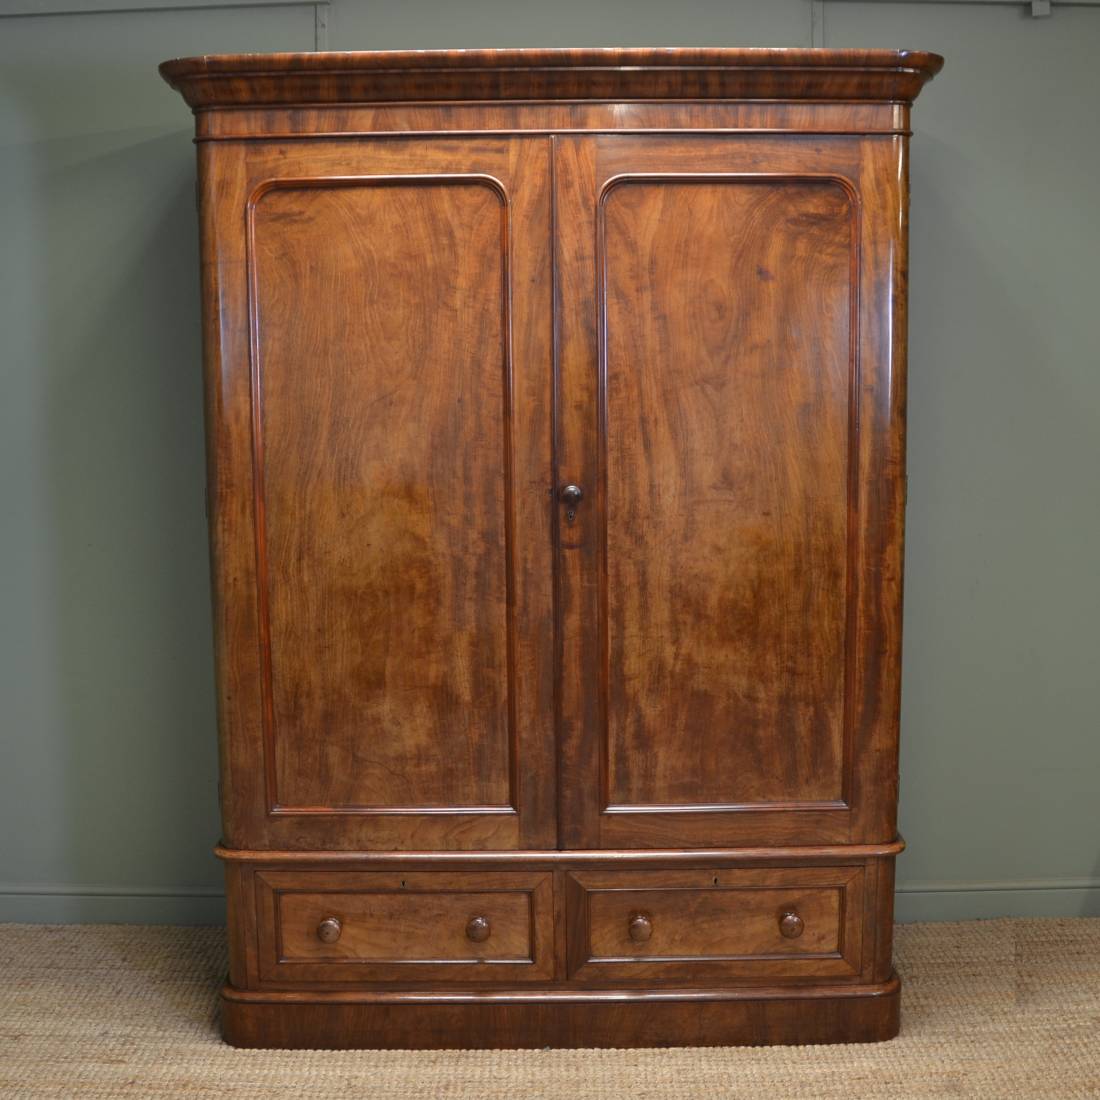 Magnificent Quality Heal And Son Figured Mahogany Antique Double Wardrobe